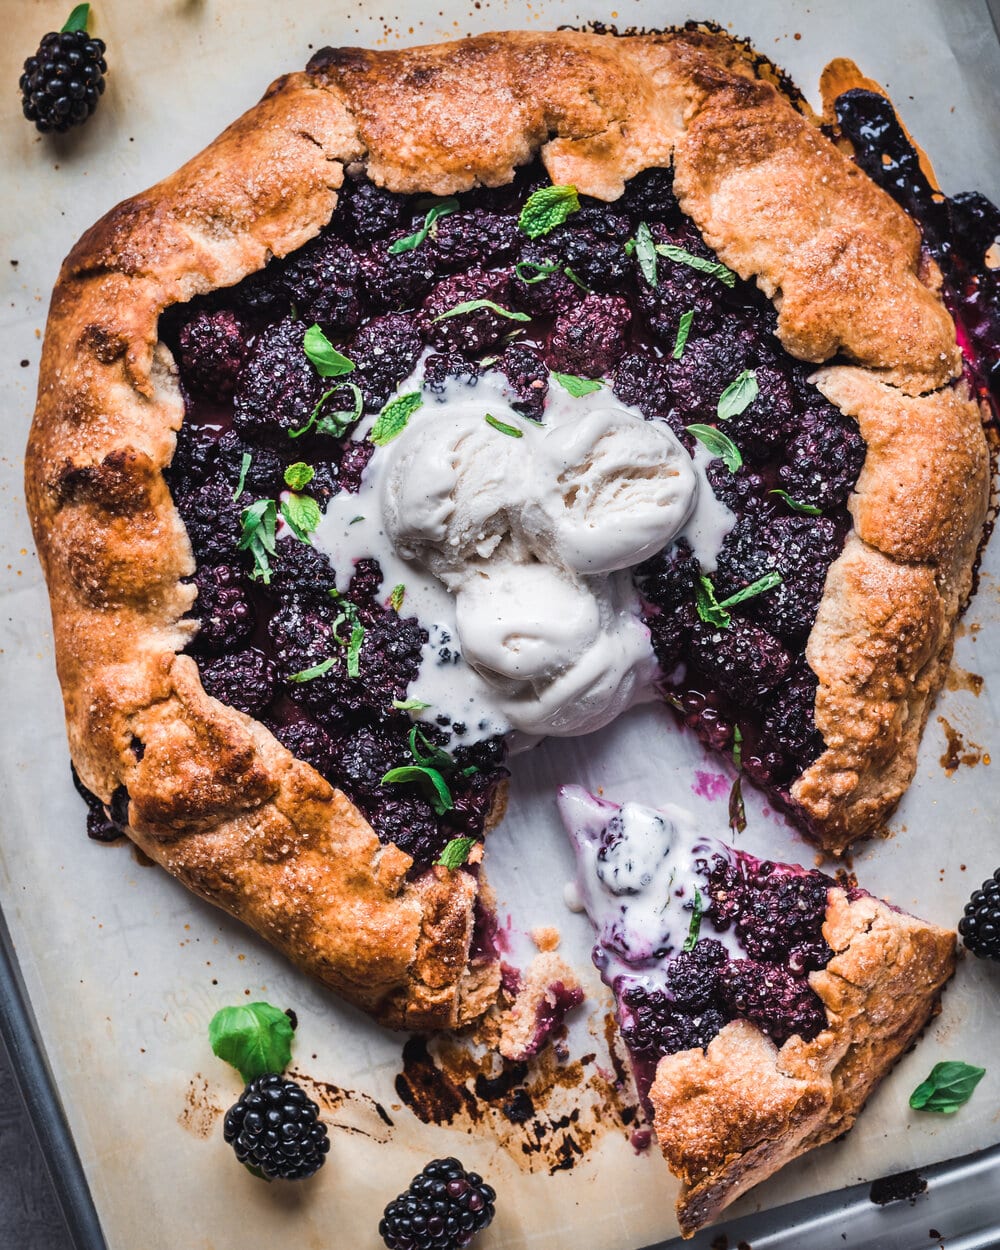 One slice cut from cooked blackberry galette with mint, basil and ice cream.